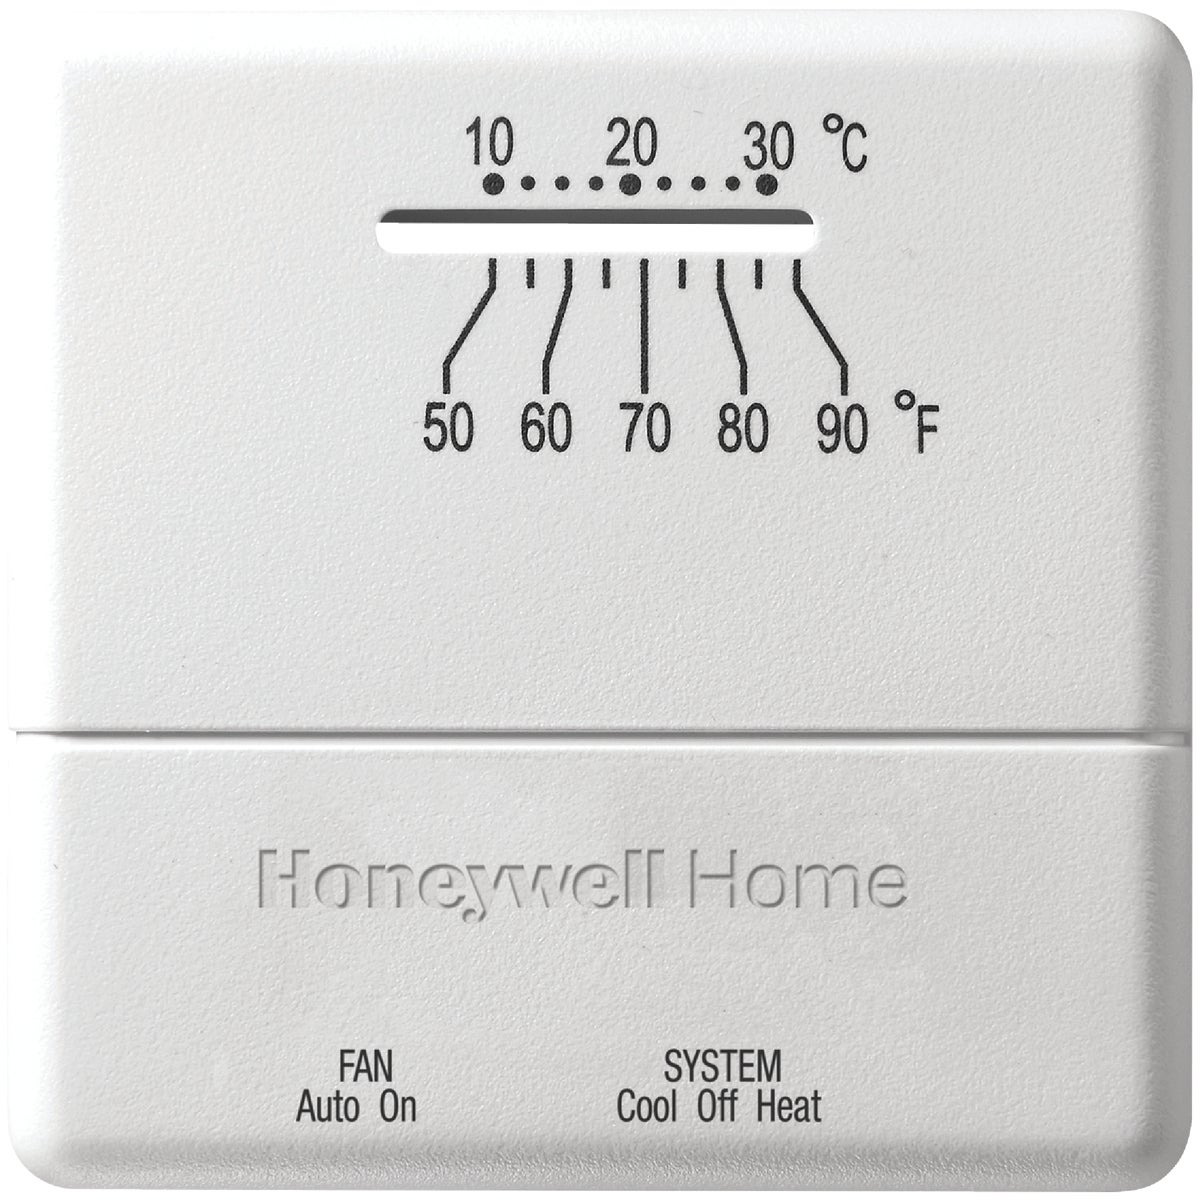 Honeywell Home Heat or Cool Mechanical Thermostat